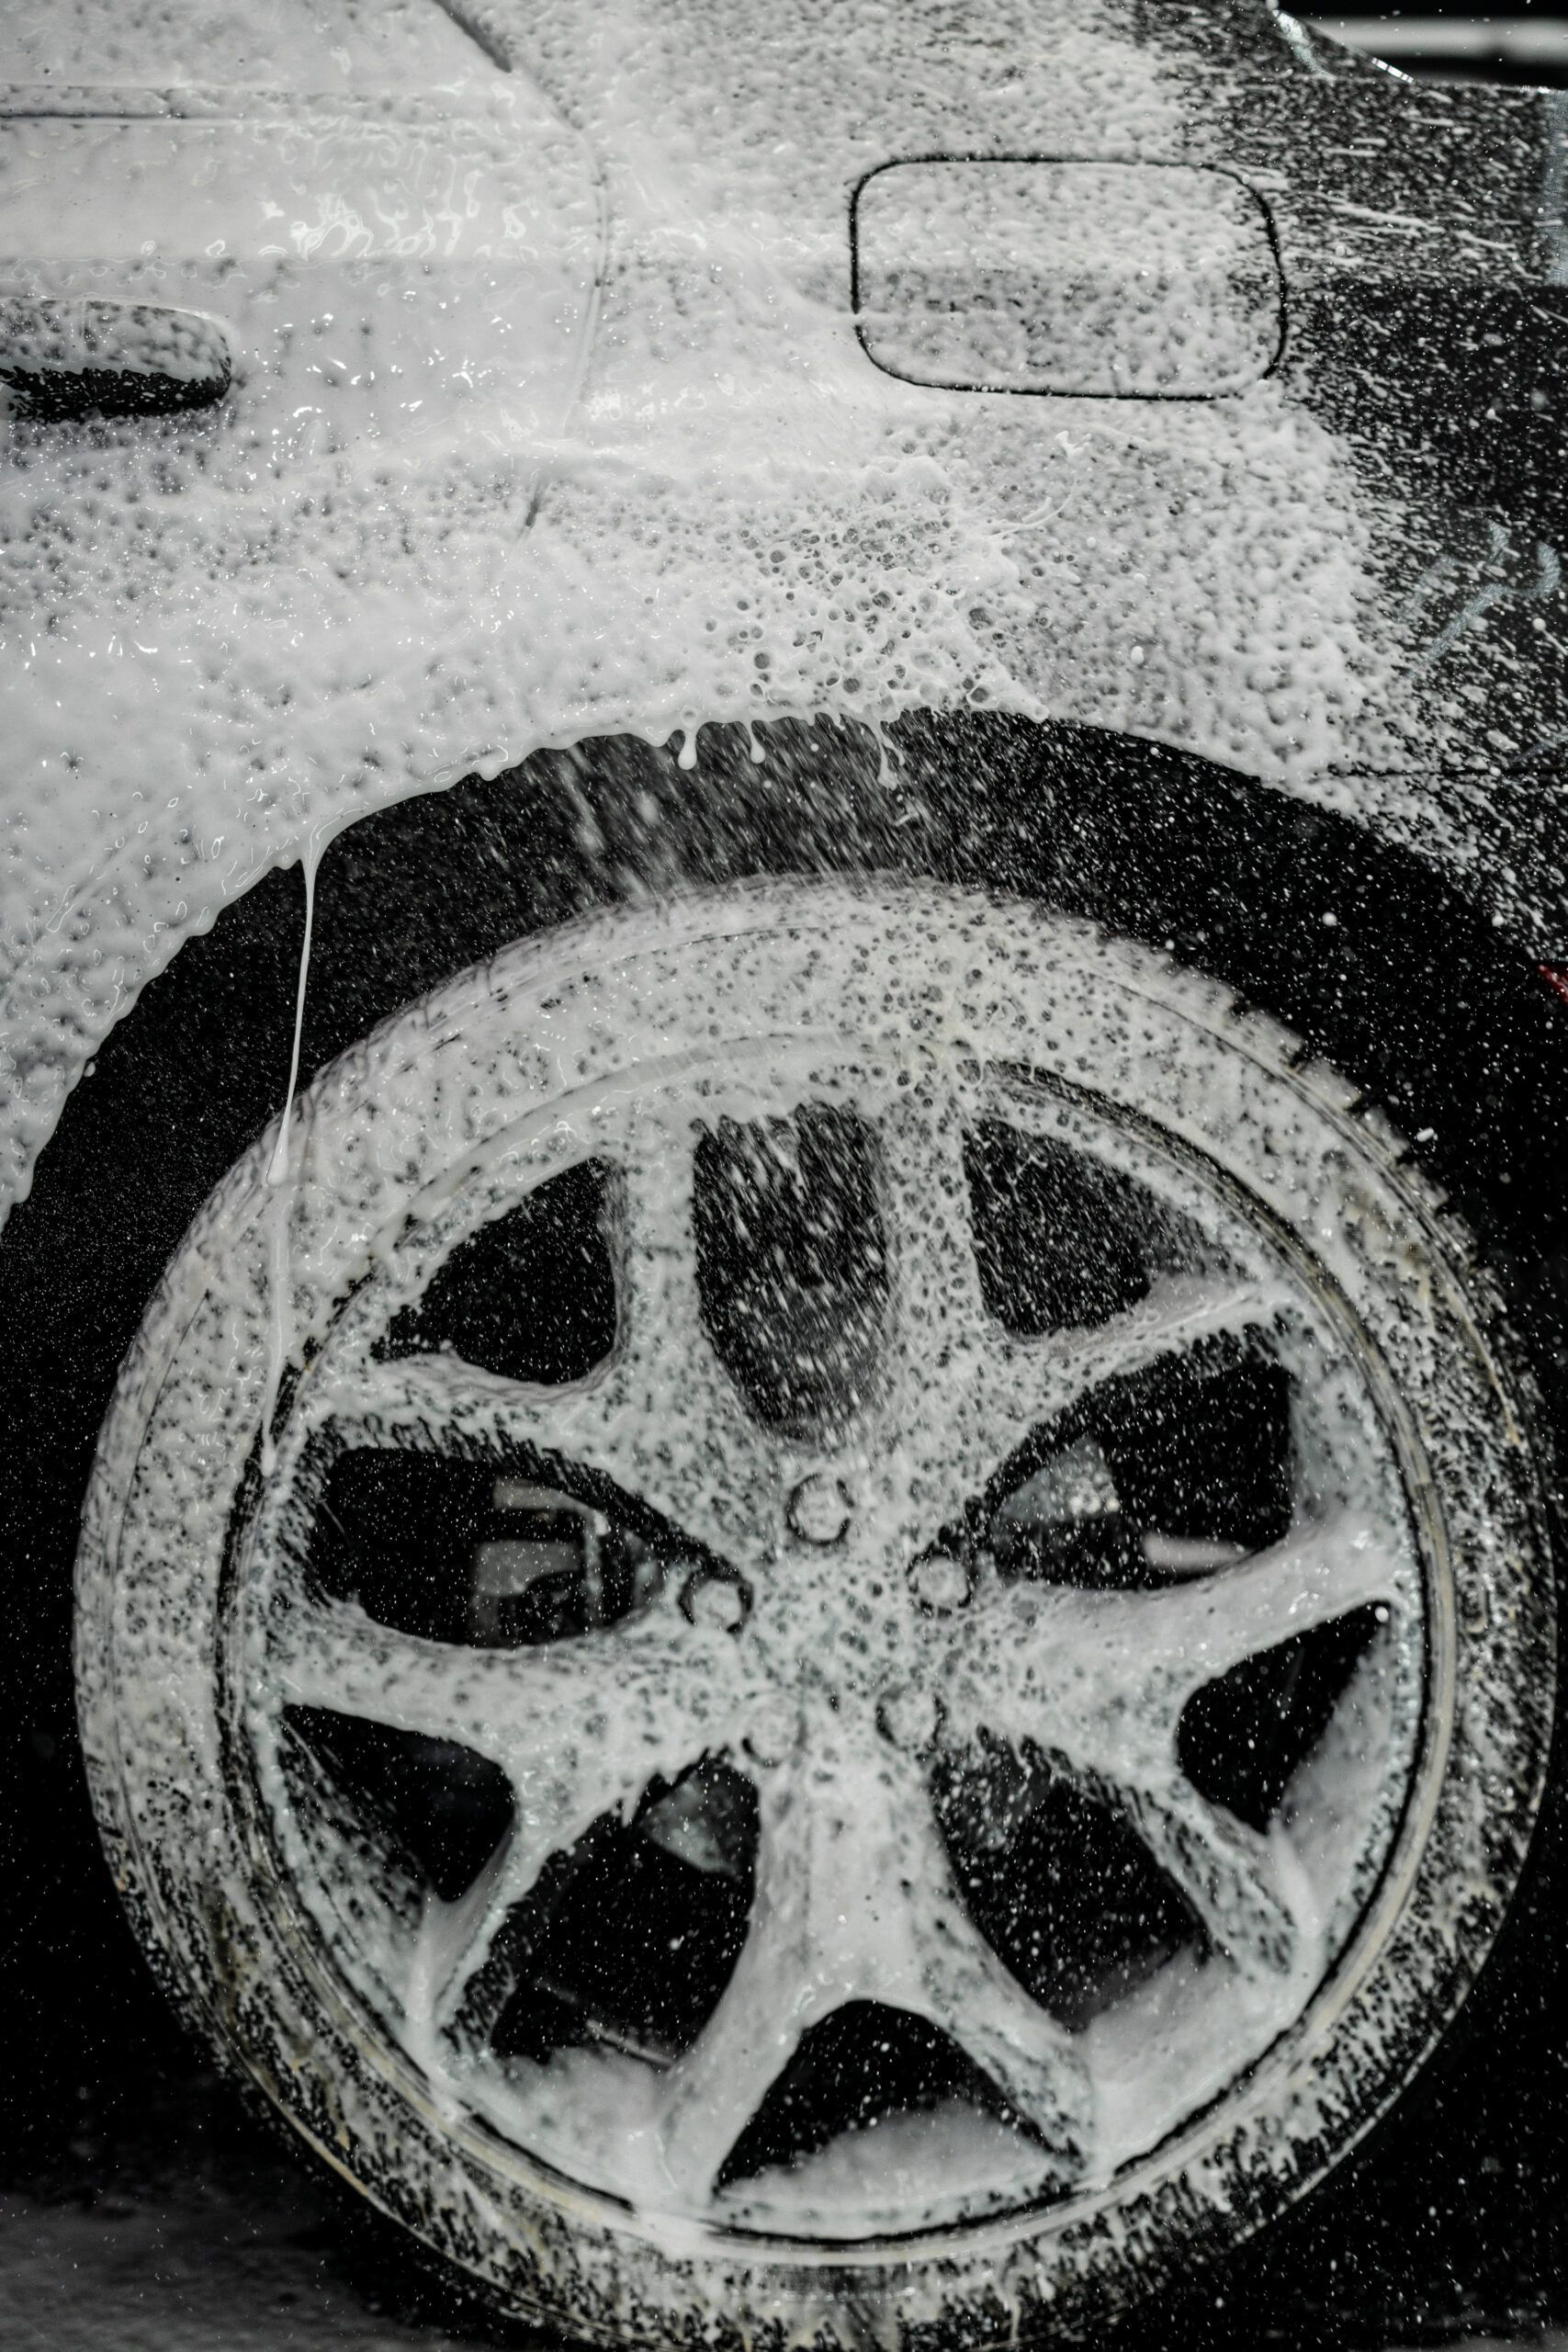 A black and white photo of a car wheel covered in foam.